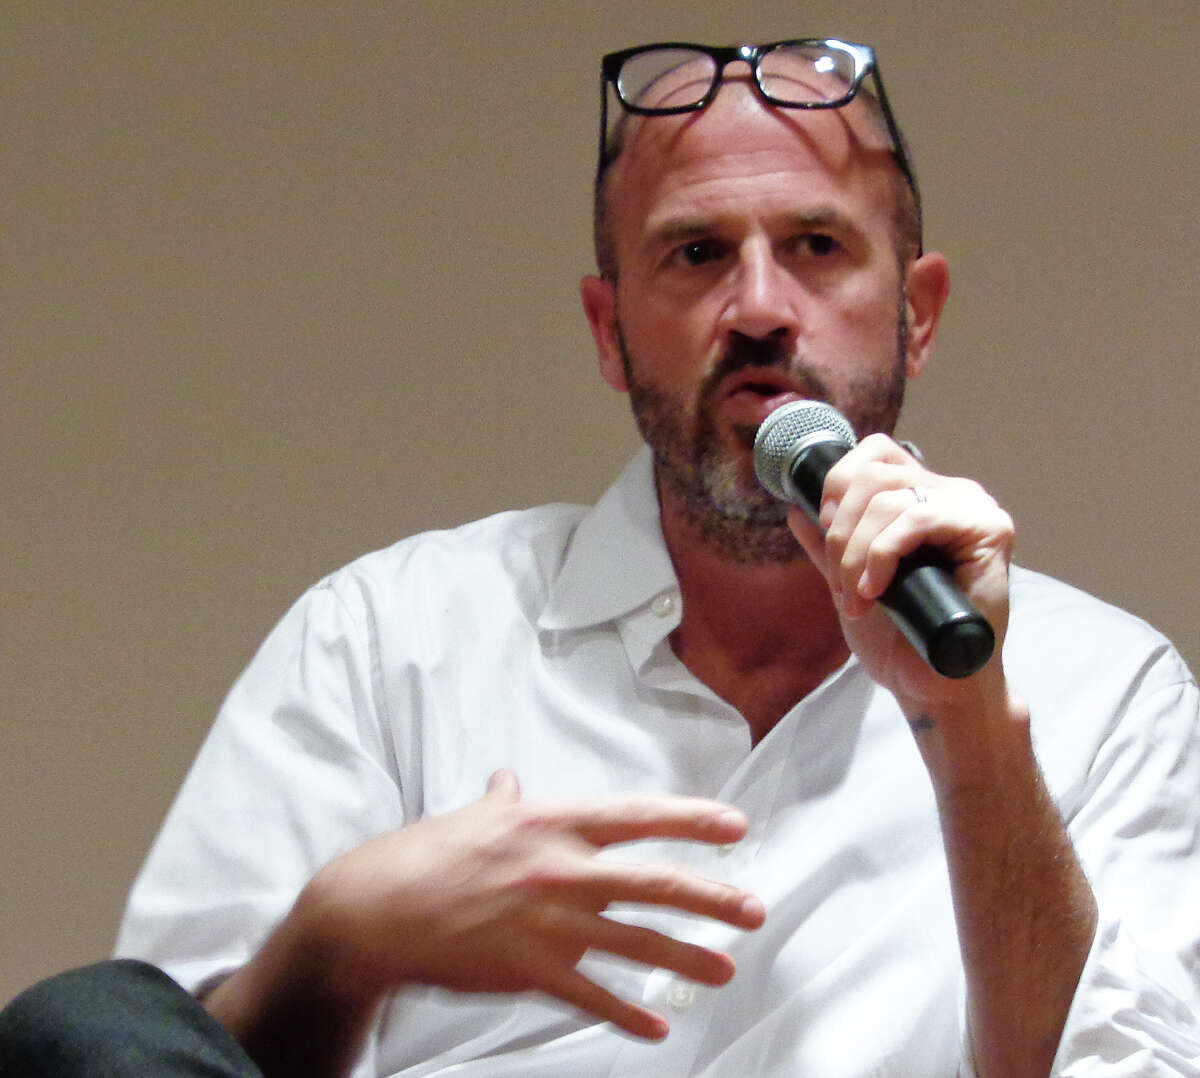 Bestselling author James Frey speaks about his new book, ìEndgame: The Calling,î to a hometown crowd at the New Canaan Library.